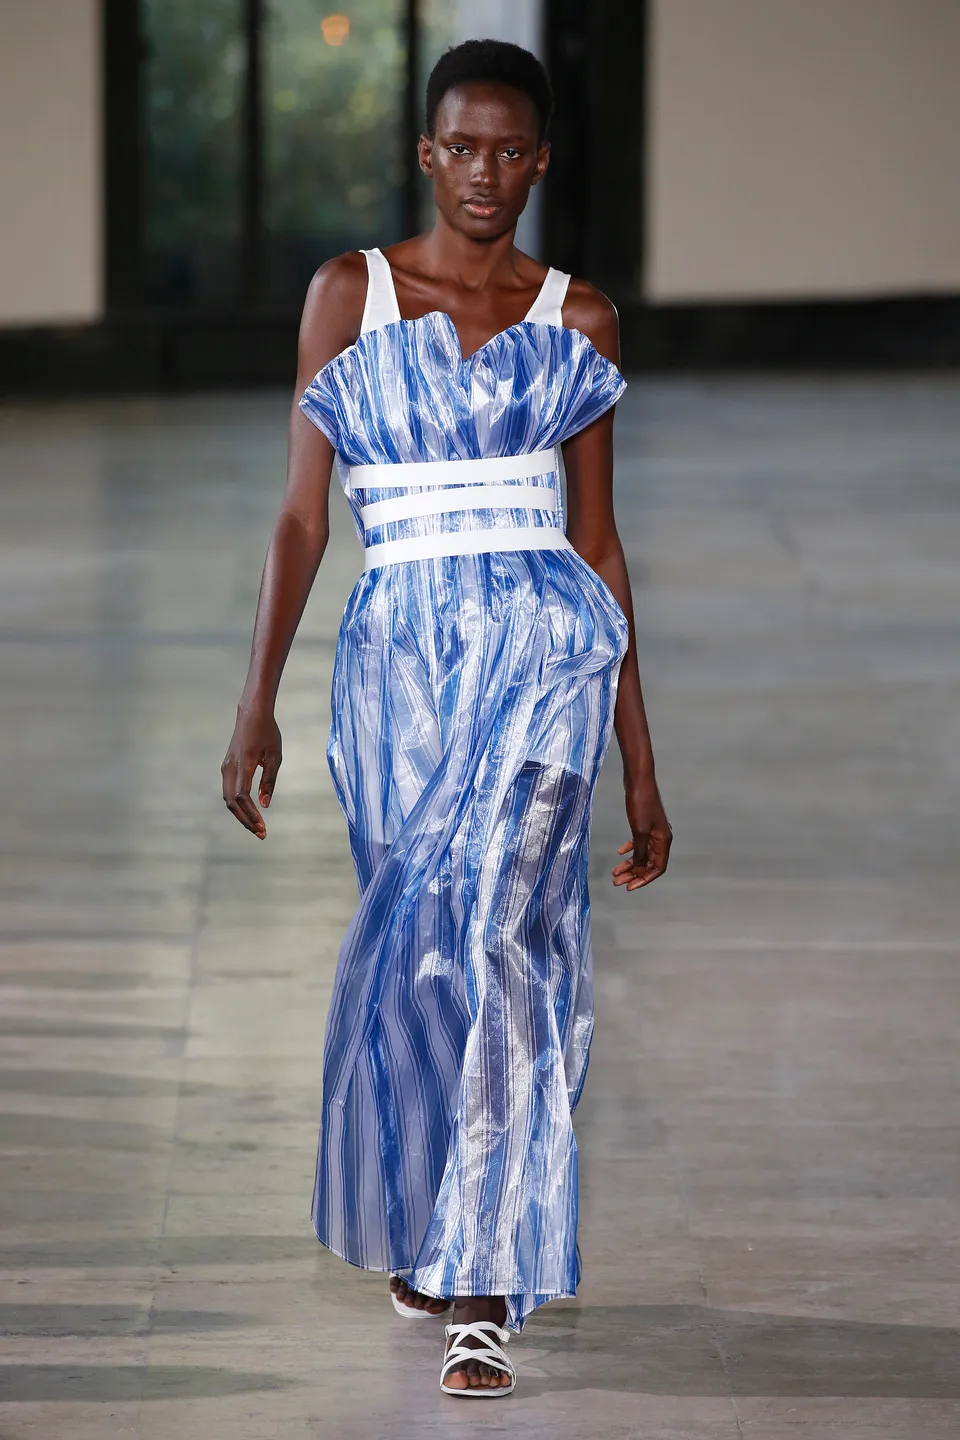 35 Of The Most Beautiful Dresses At Paris Fashion Week | HuffPost Life